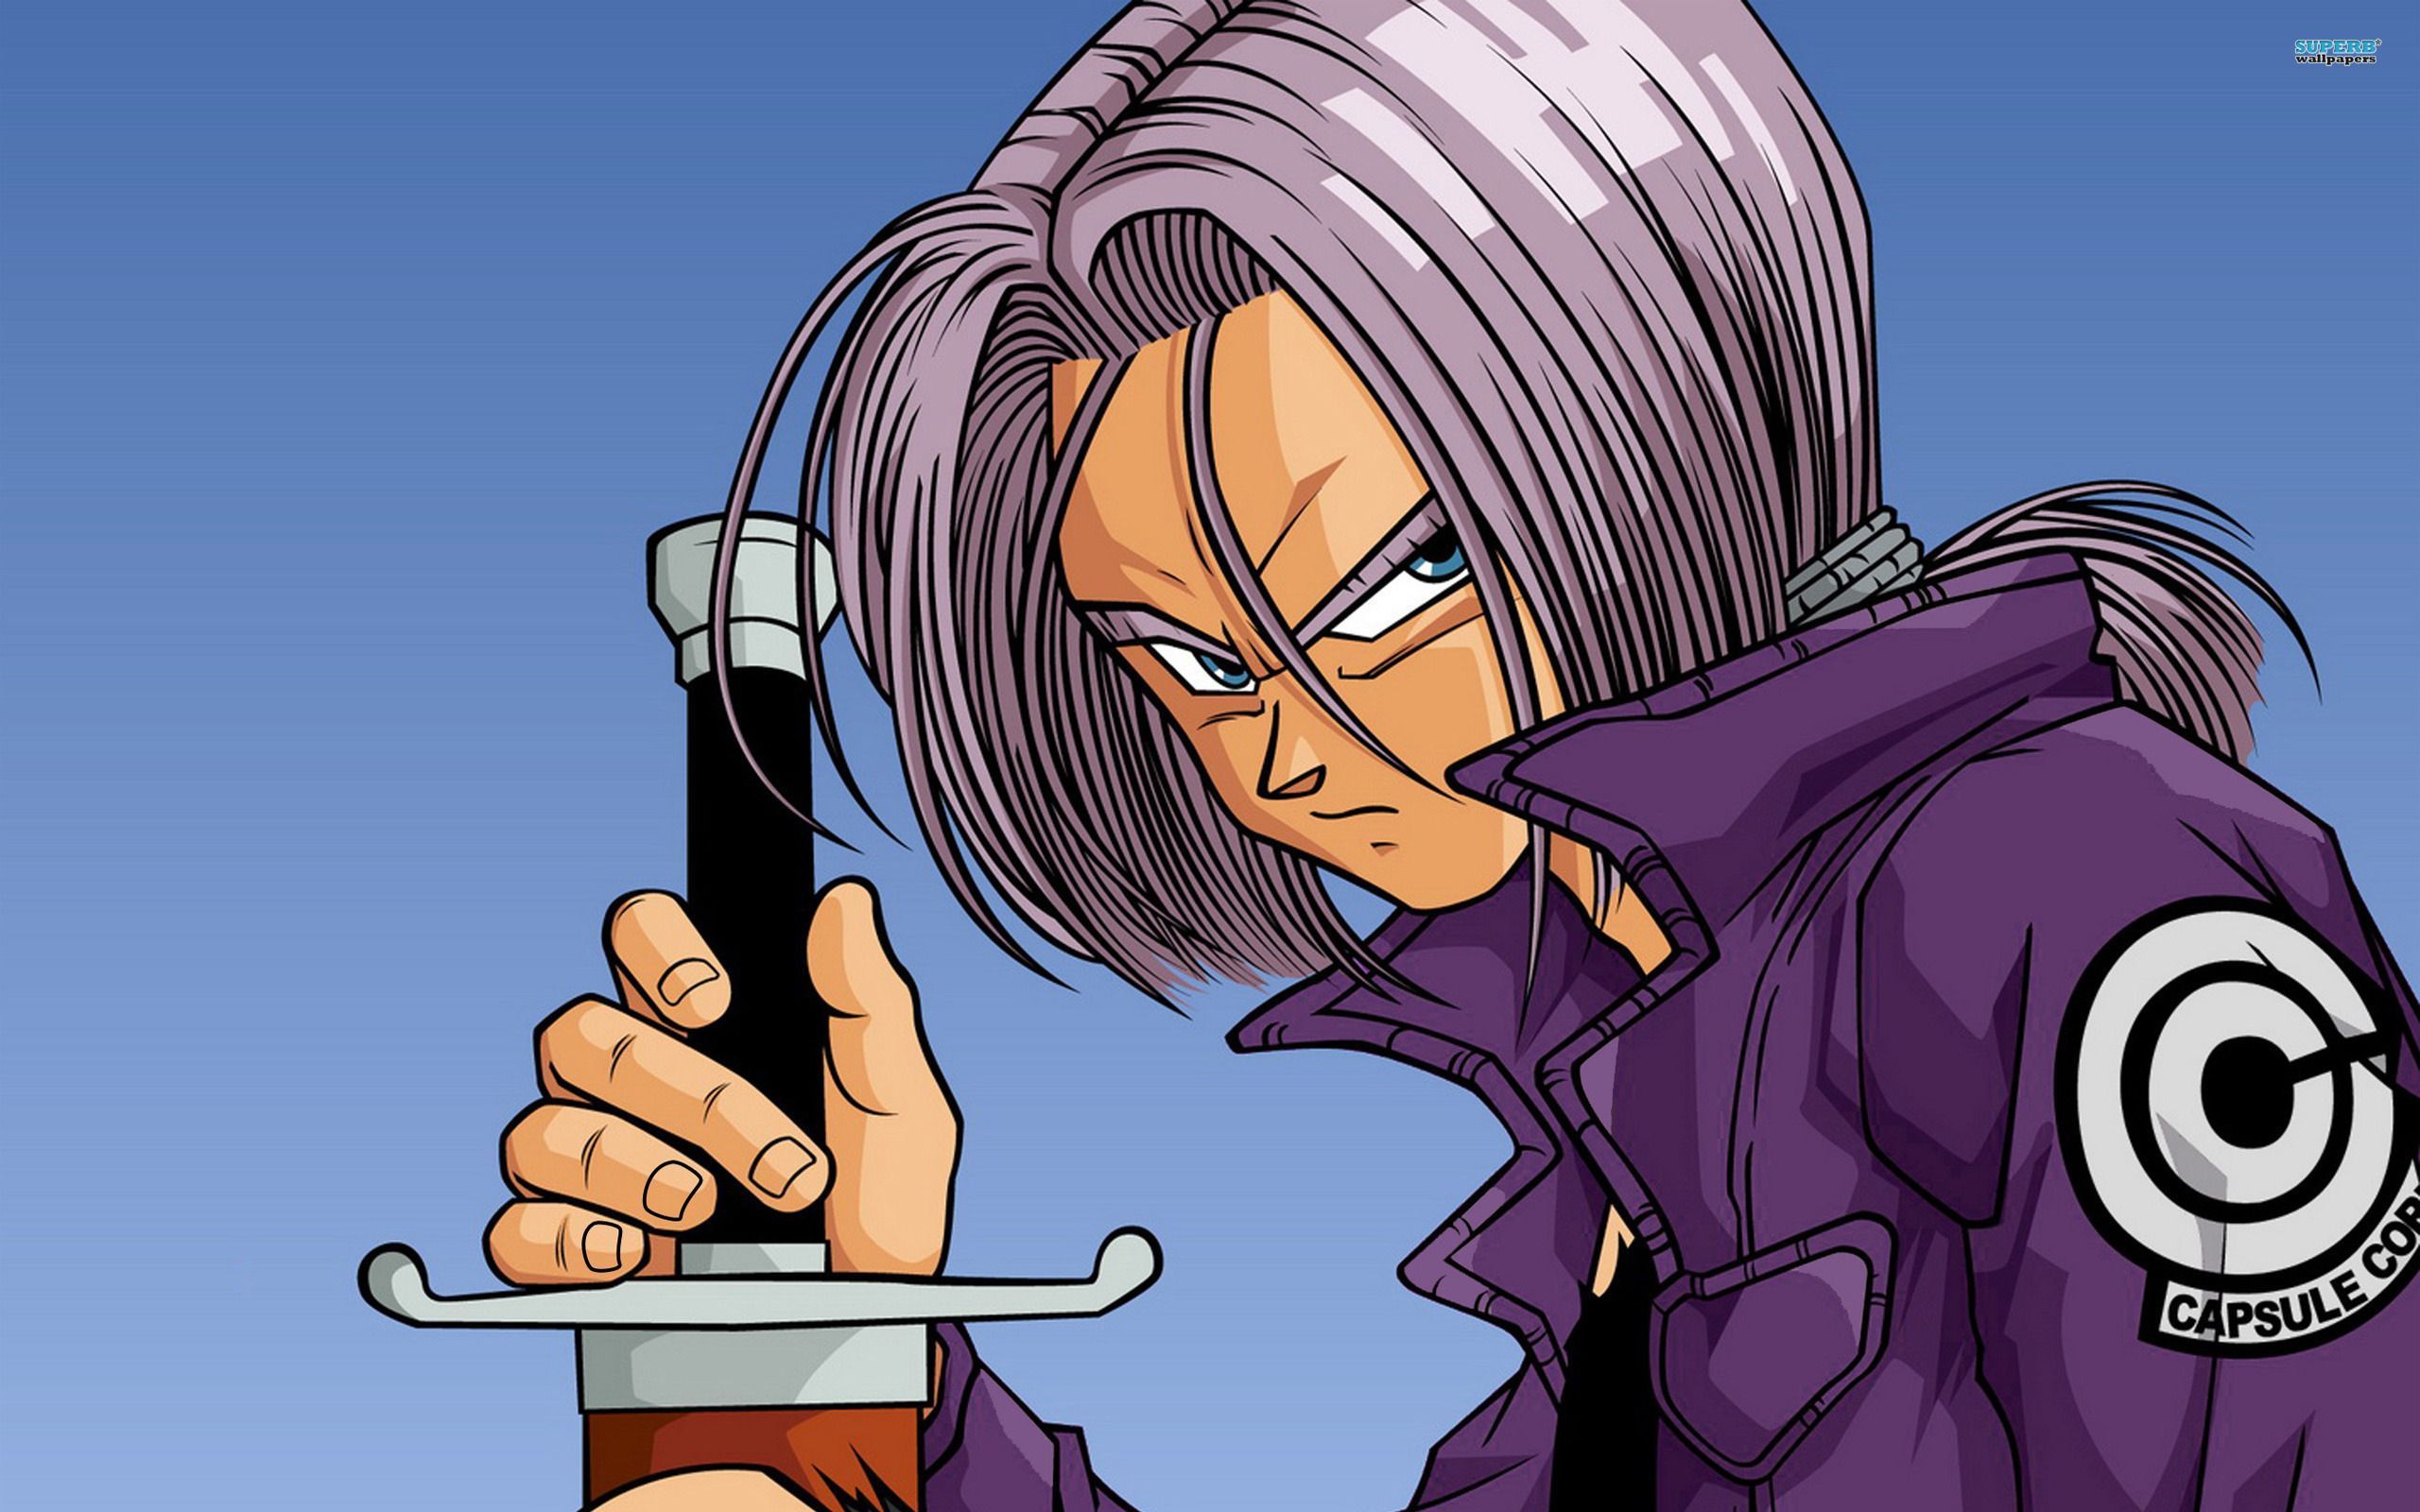 Grand Prairian Eric Vale is the voice of Trunks & Future Trunks